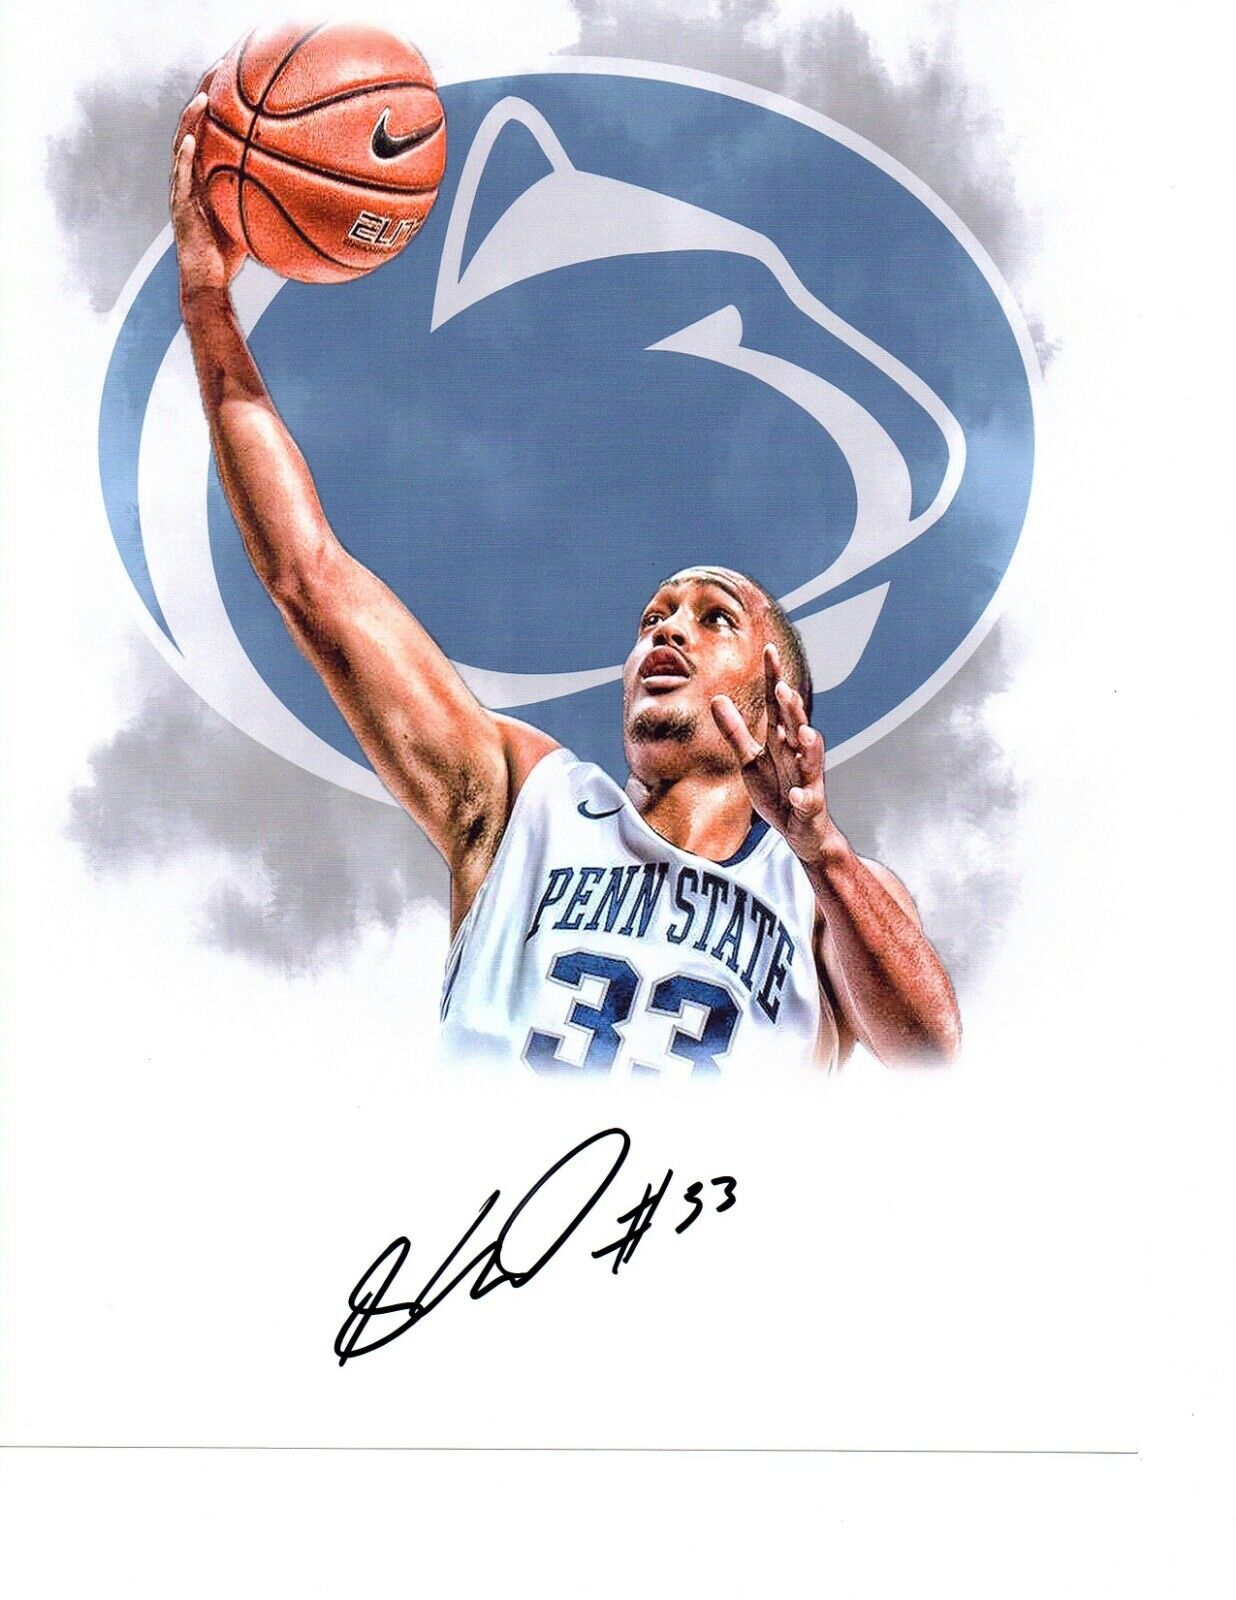 Shep Garner Penn State Nittany Lions basketball Signed Photo Poster painting 8x10 Autograph PSU@